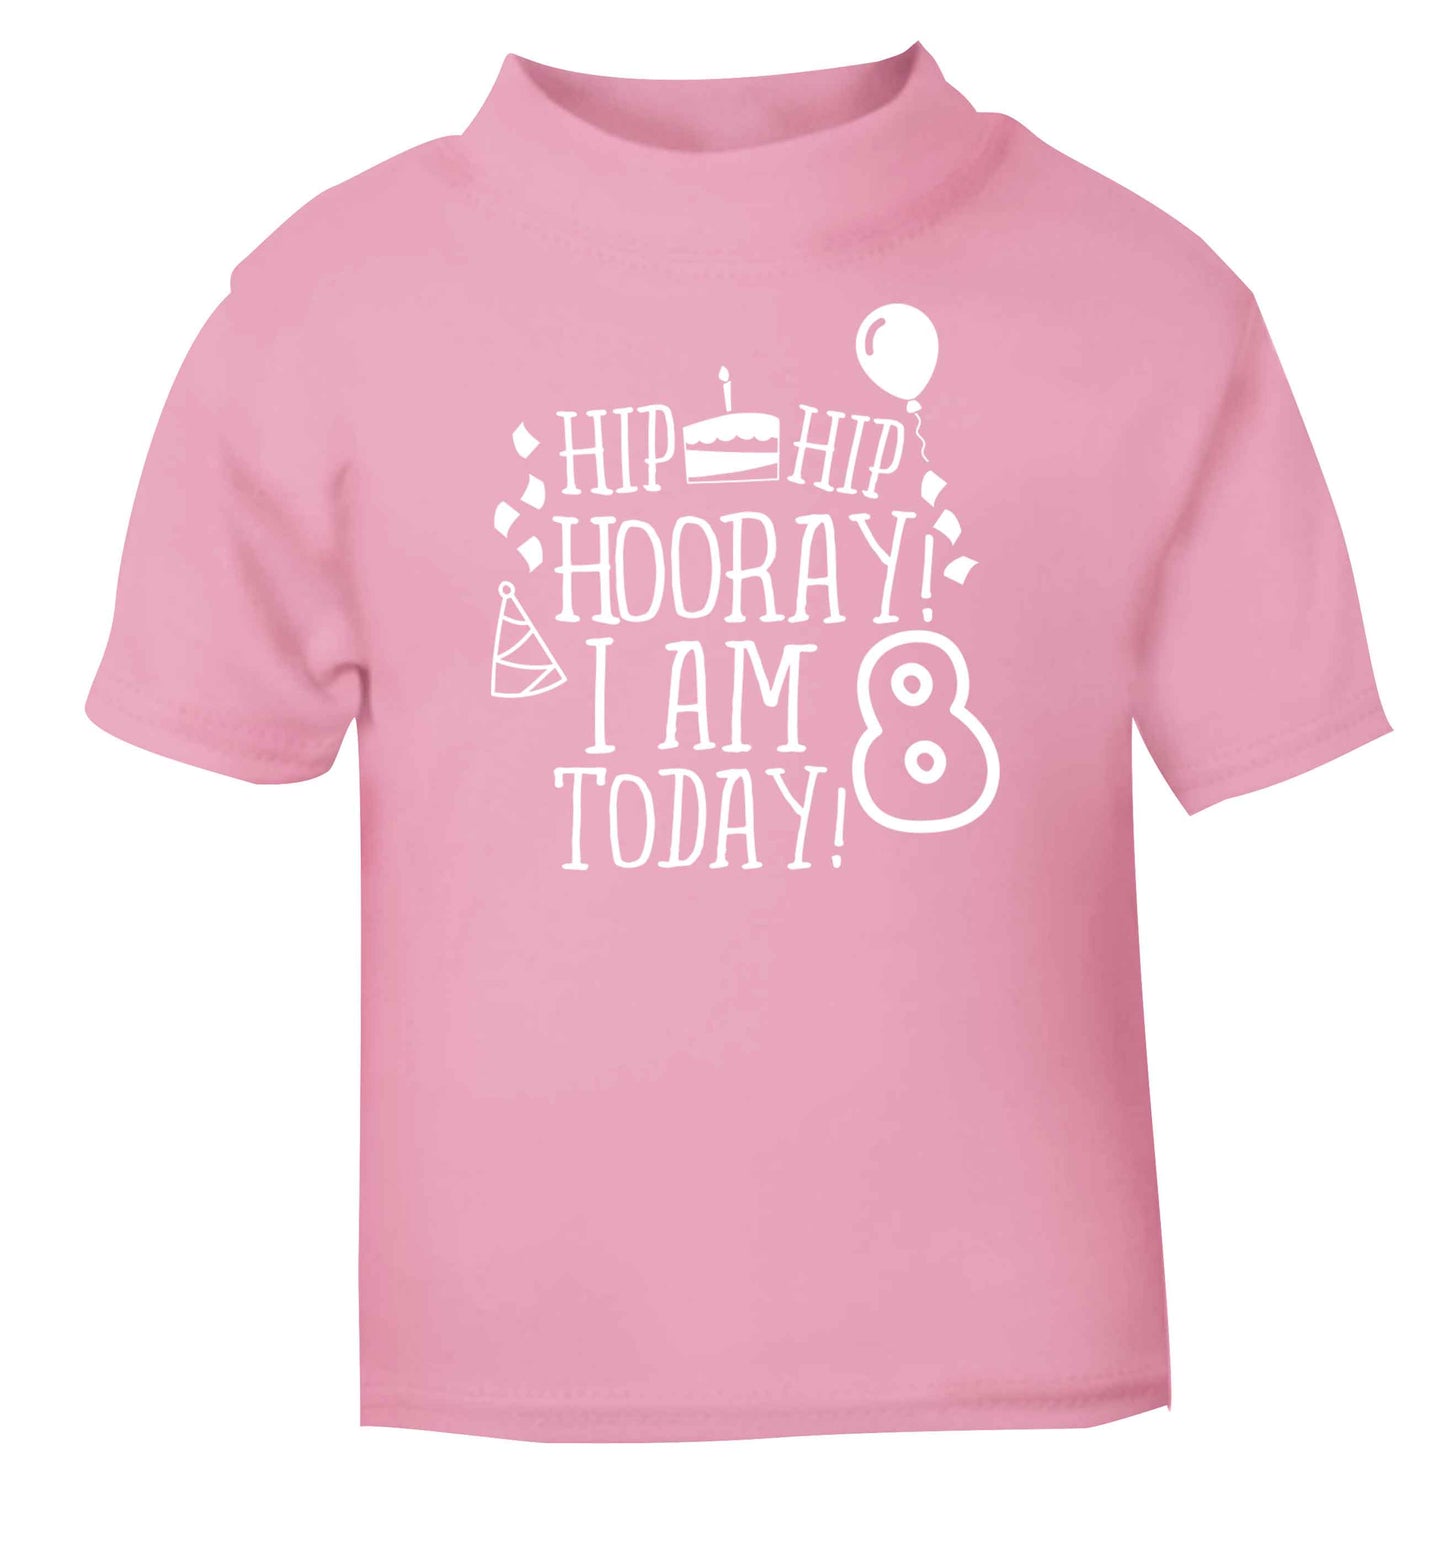 Hip hip hooray I am 8 today! light pink baby toddler Tshirt 2 Years